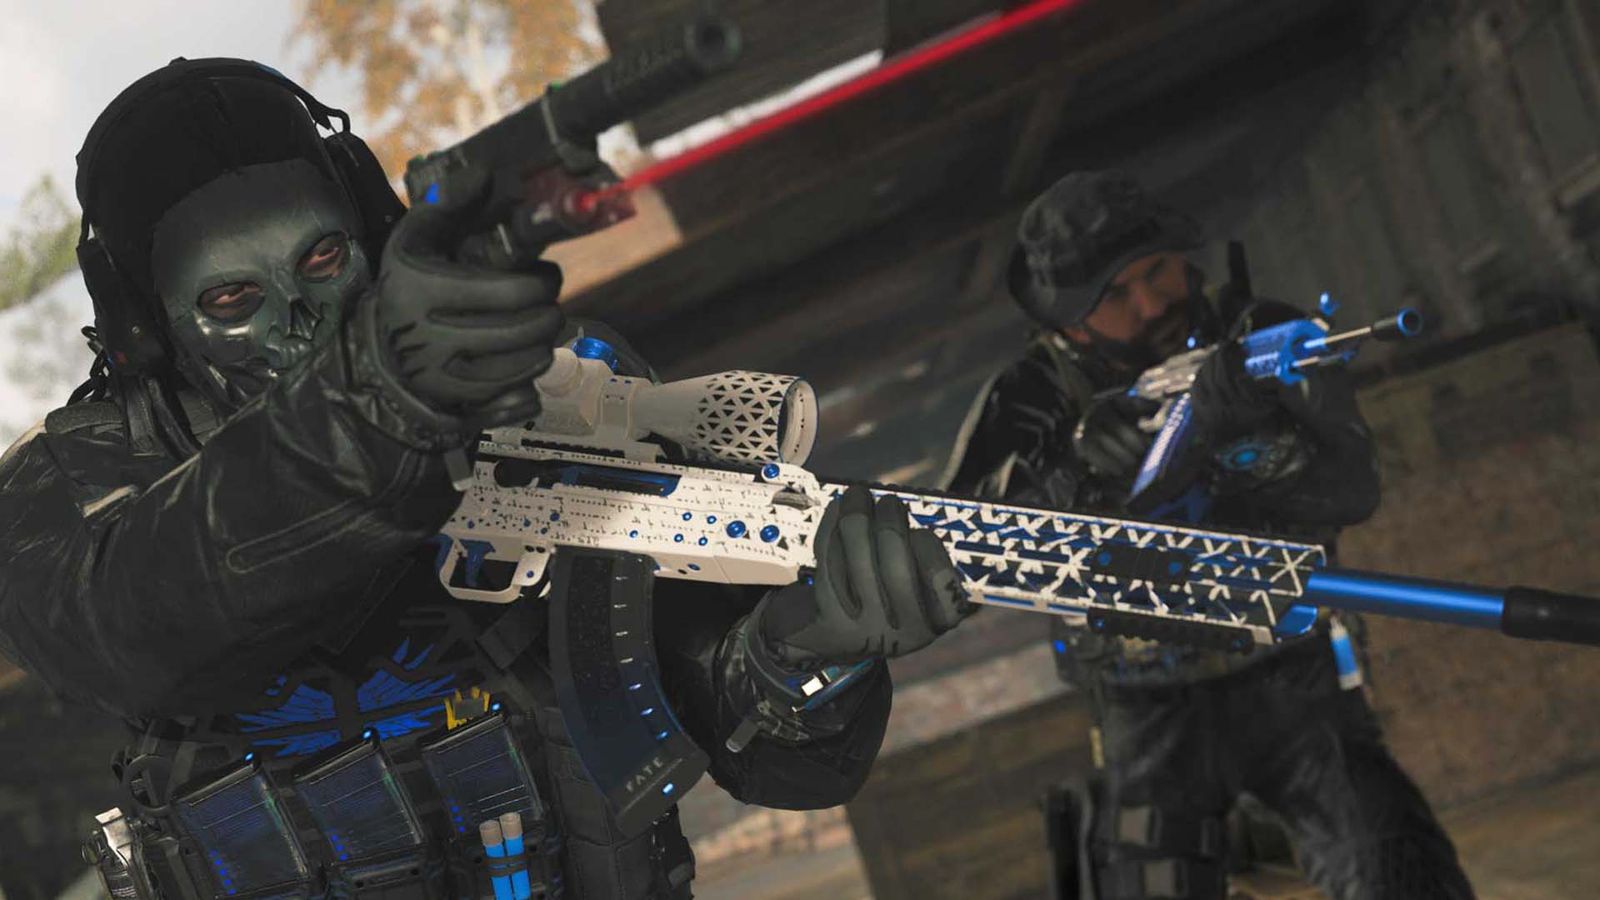 Modern Warfare 3 player holding pistol and marksman rifle with Captain Price in background